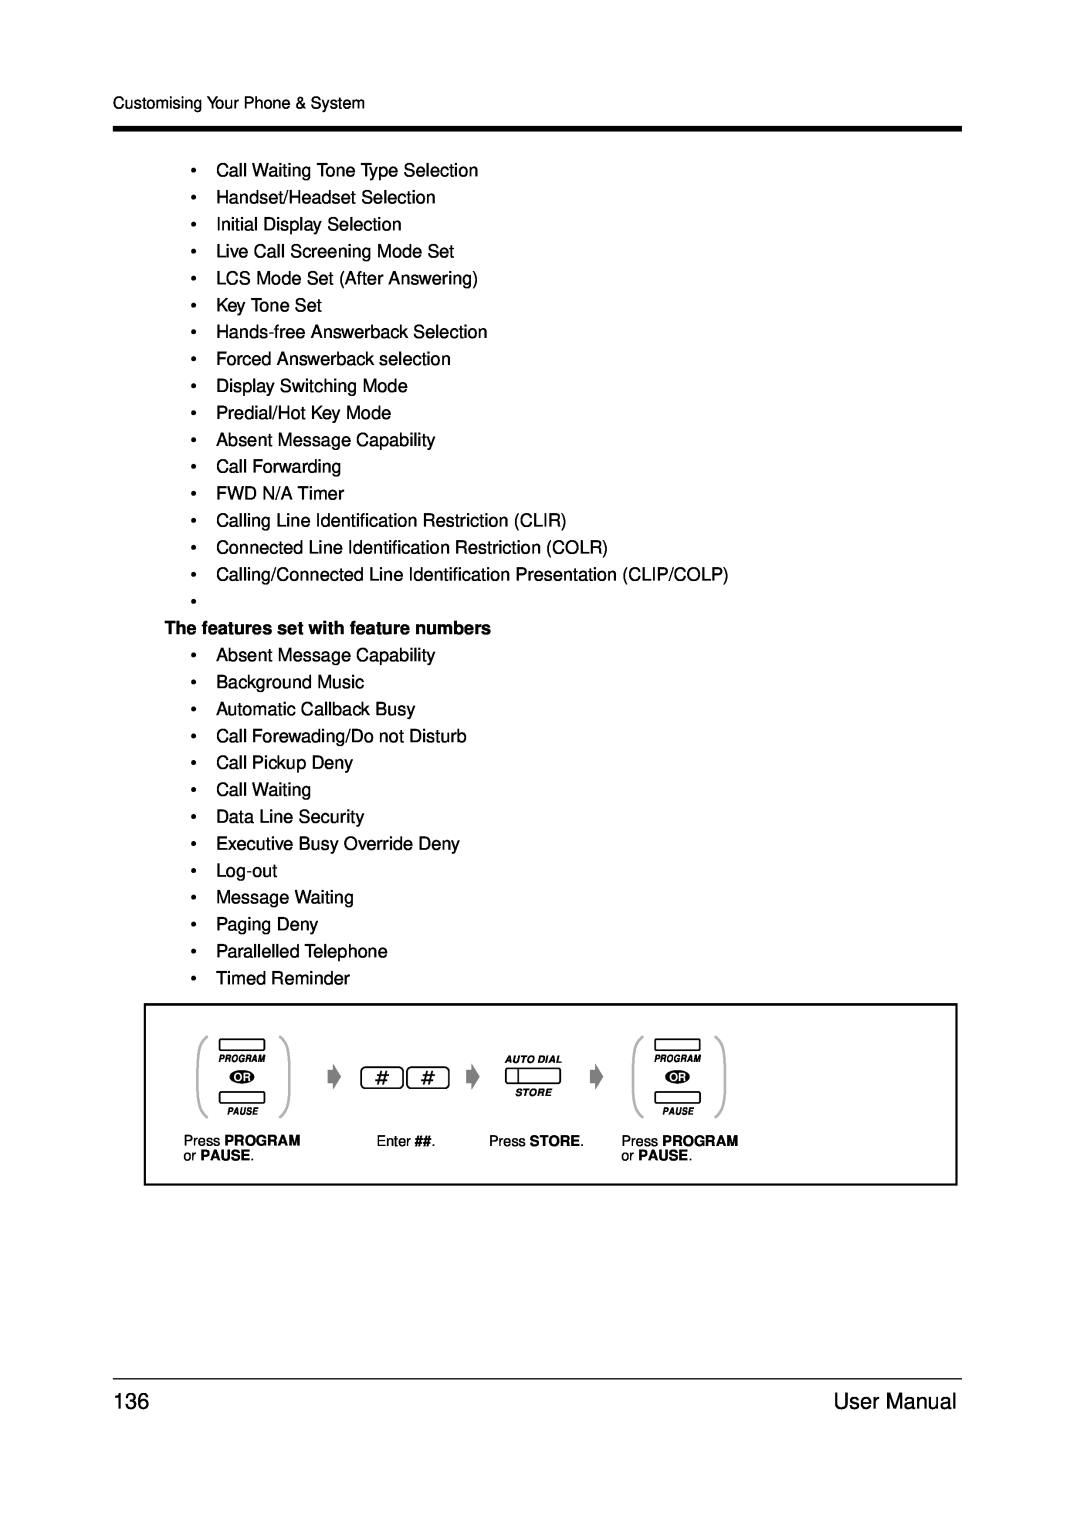 Panasonic KX-TDA200 user manual The features set with feature numbers 